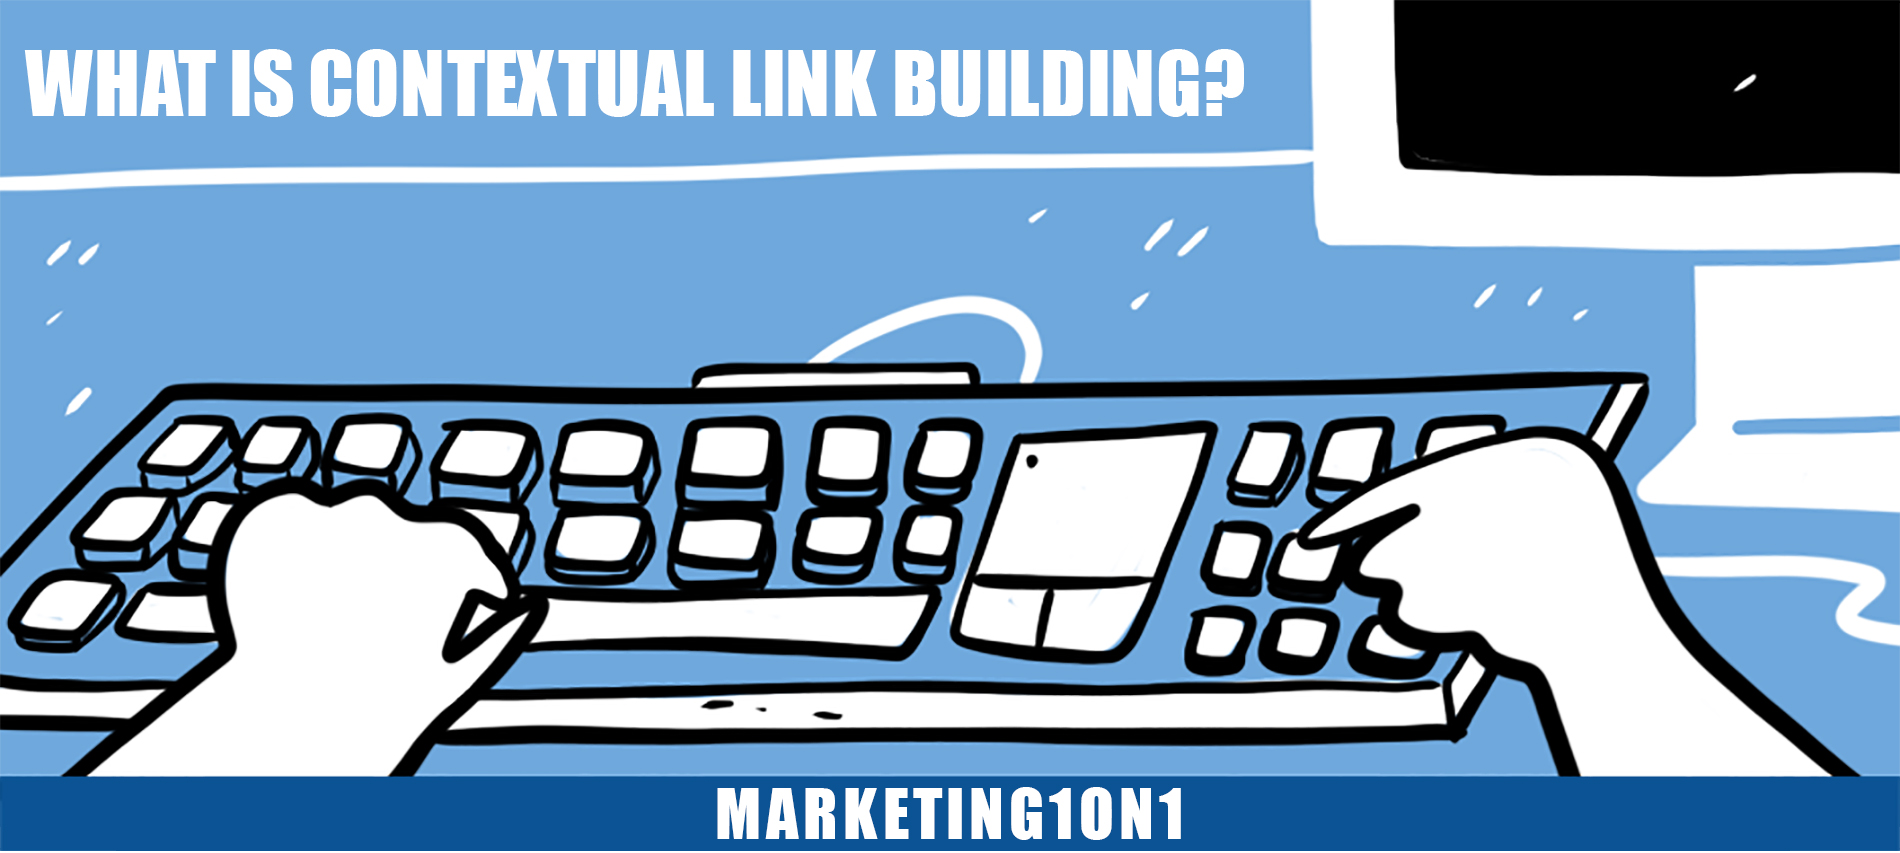 What is contextual link building?